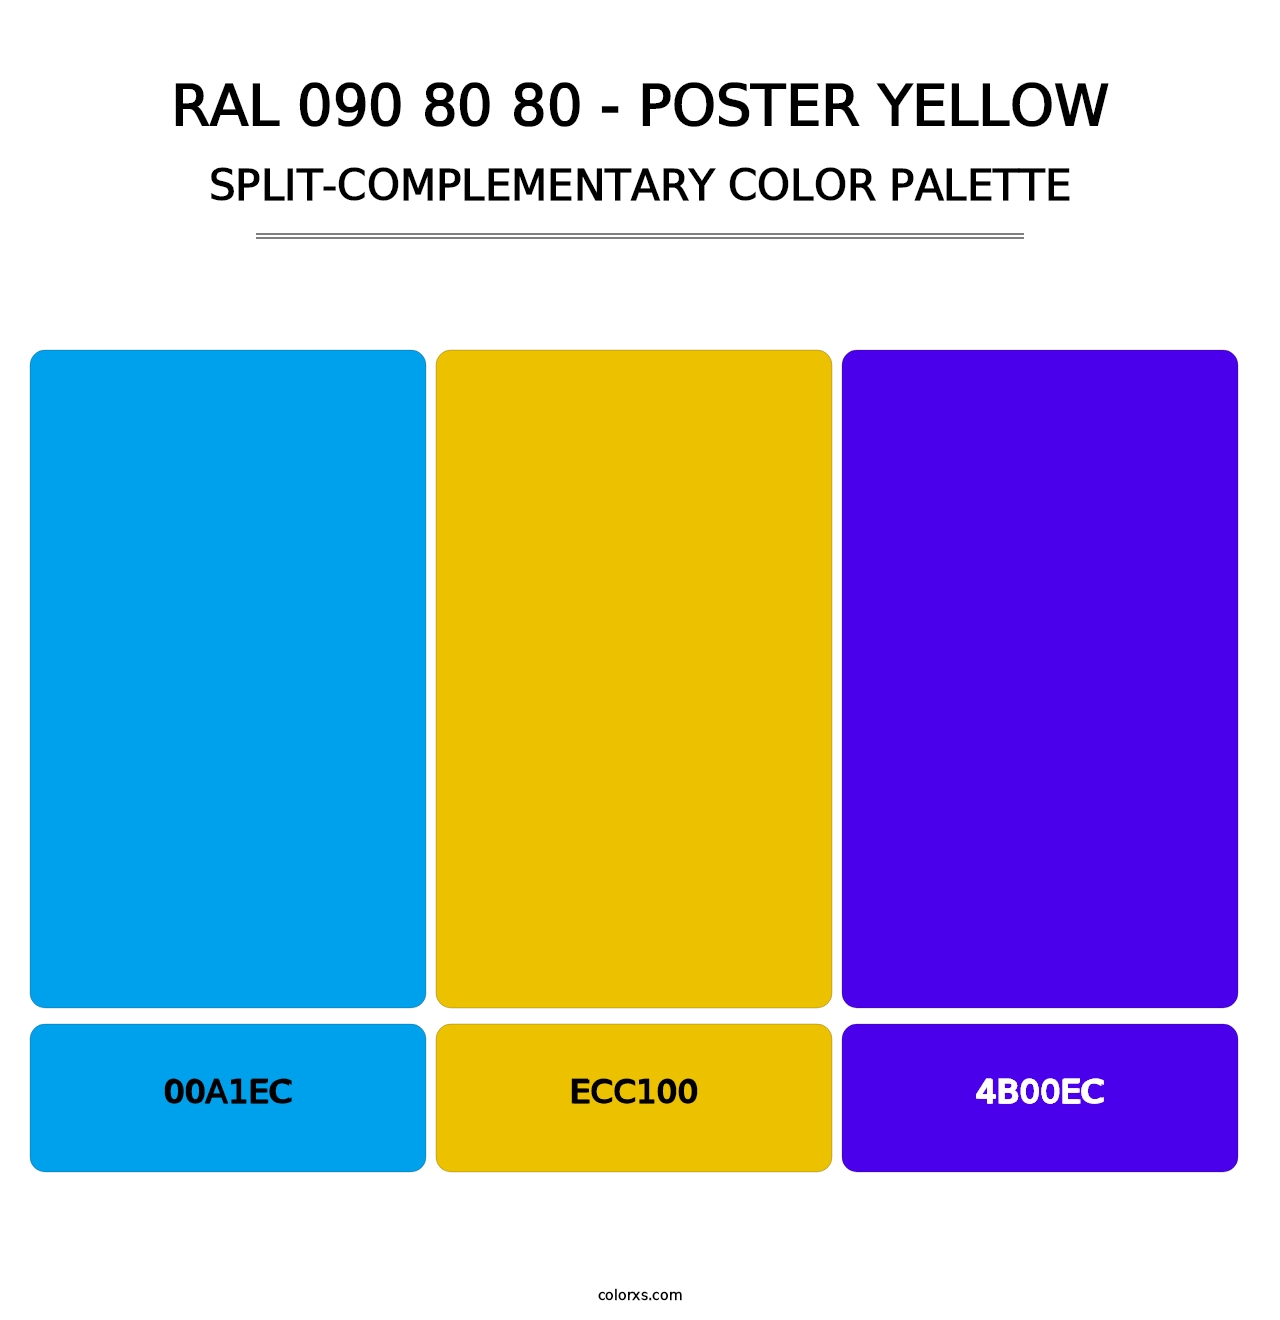 RAL 090 80 80 - Poster Yellow - Split-Complementary Color Palette